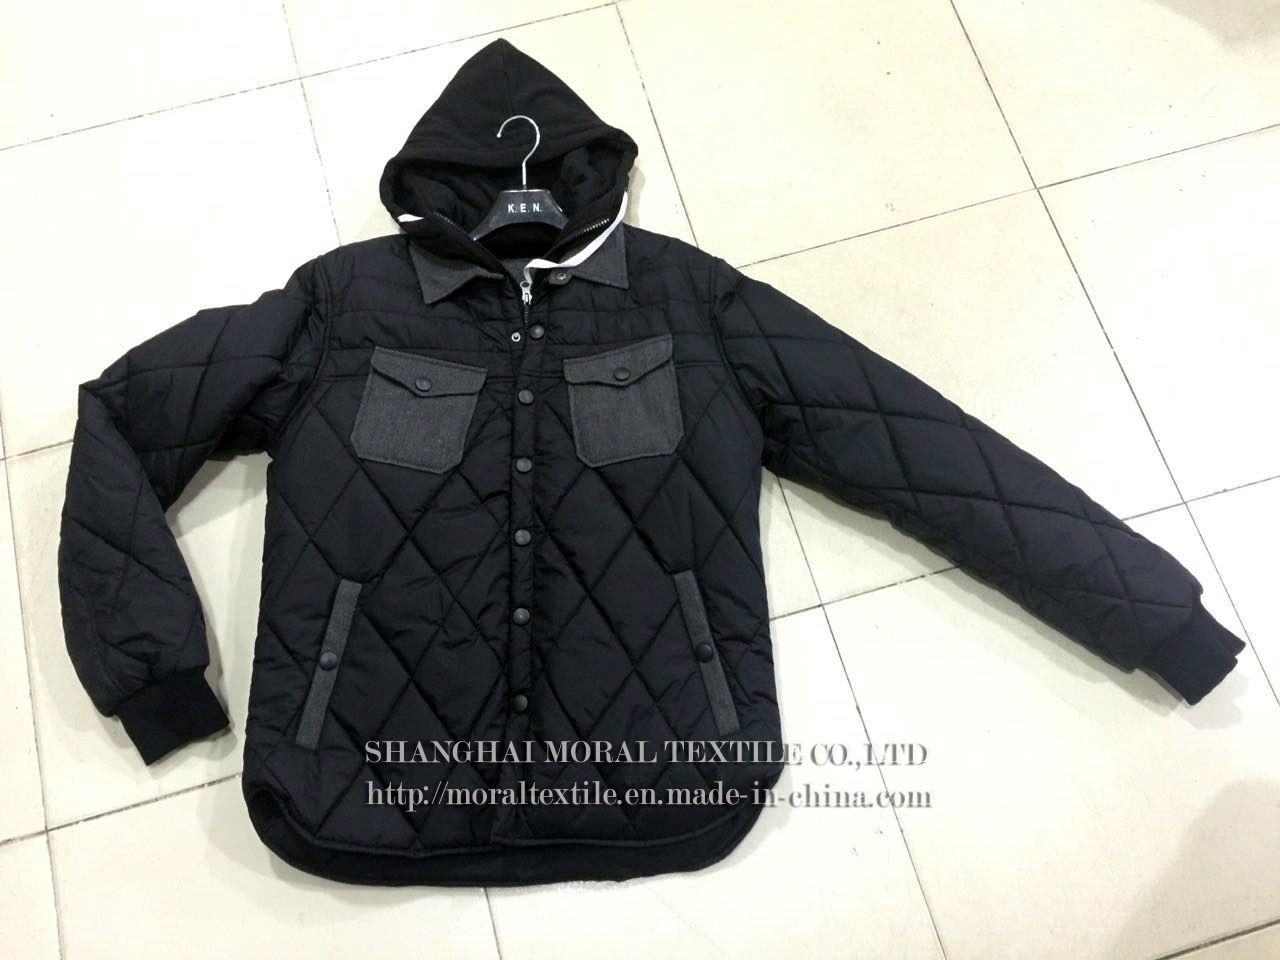 Men's Quilting Jacket with Hood